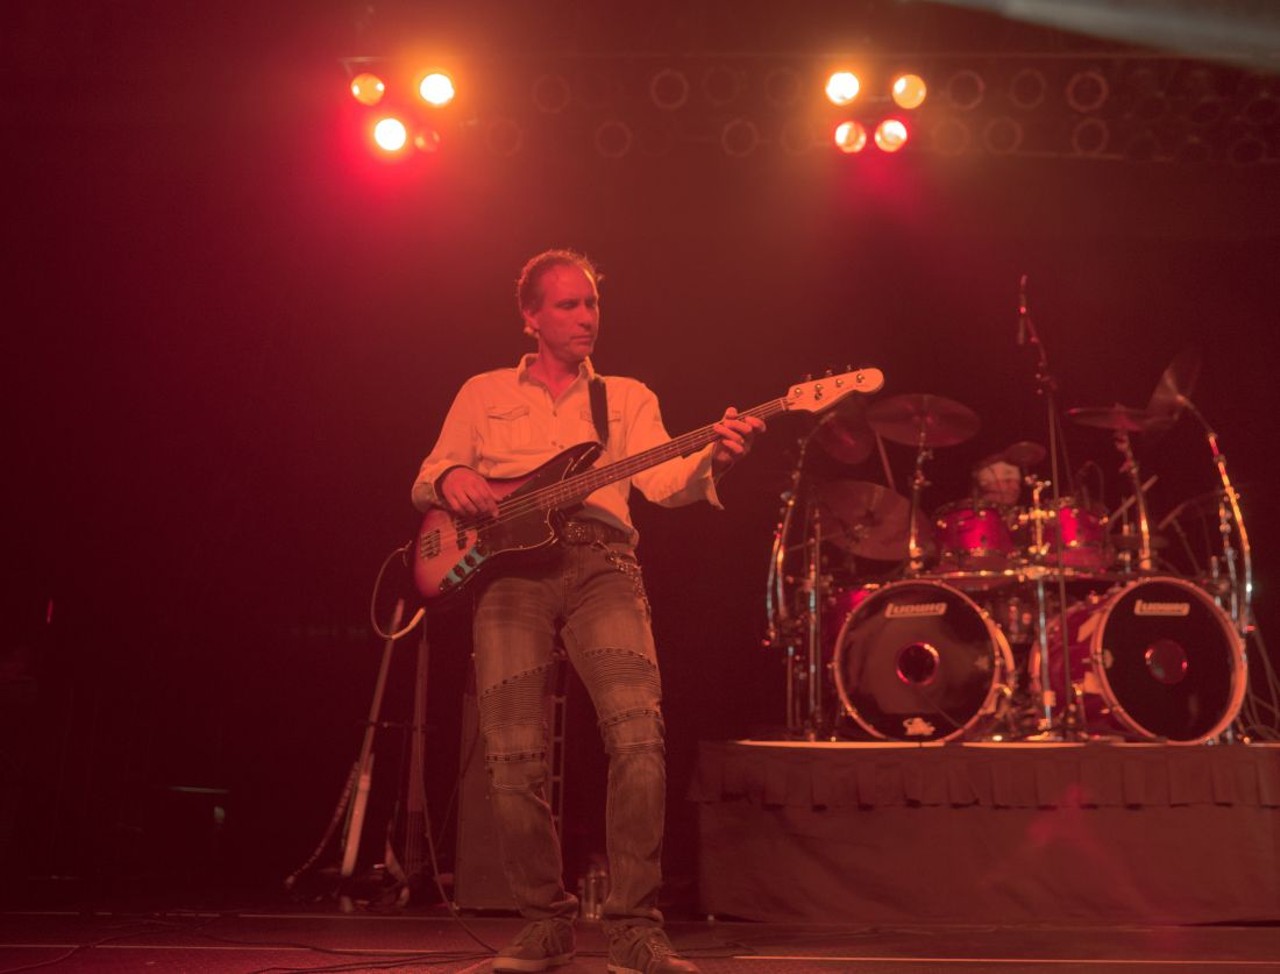 E5C4P3 &#151; The Journey Tribute Performing at Hard Rock Live